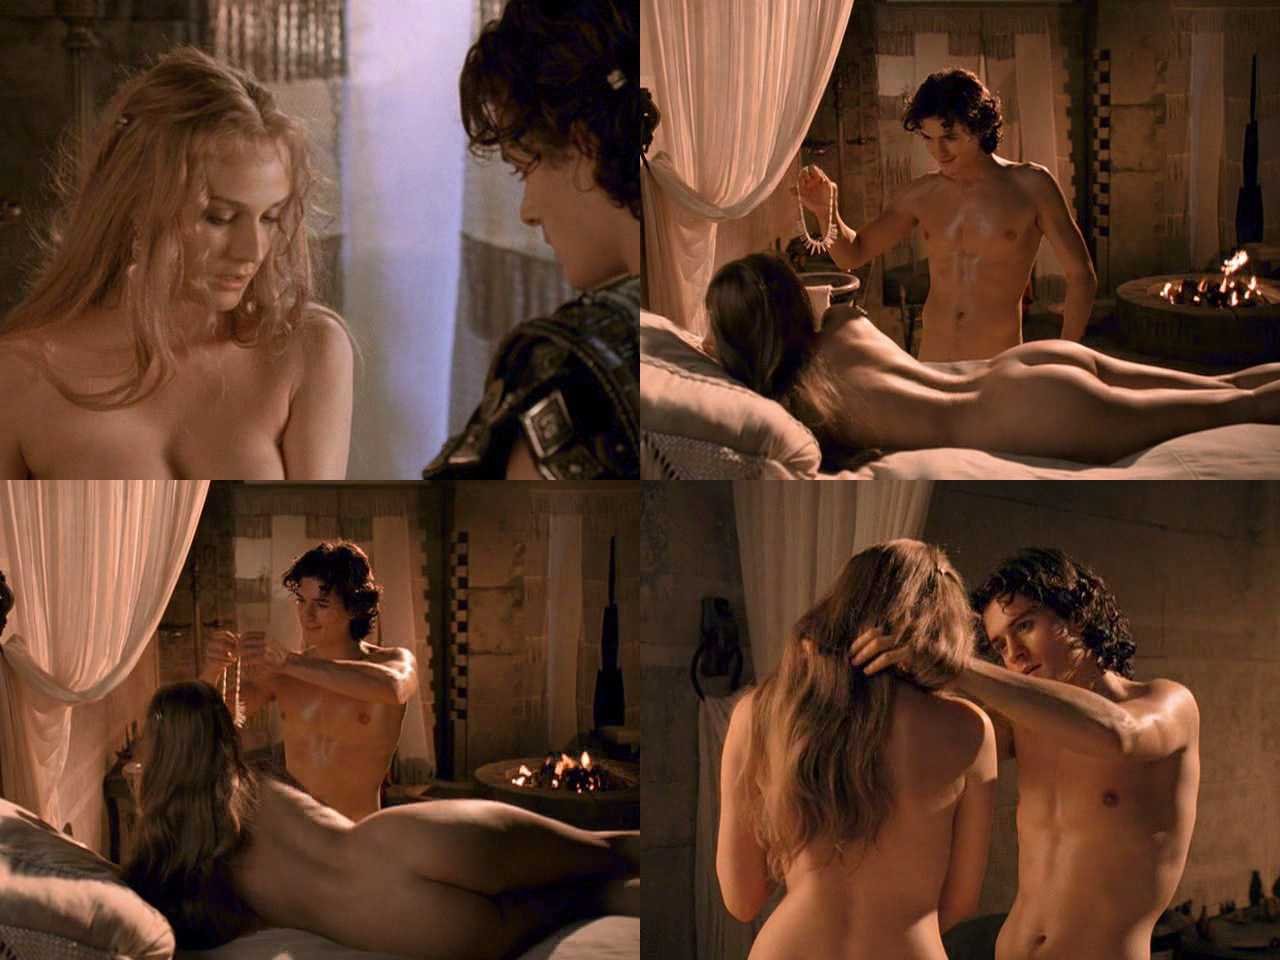 charity oliver recommends diane kruger nude scene pic